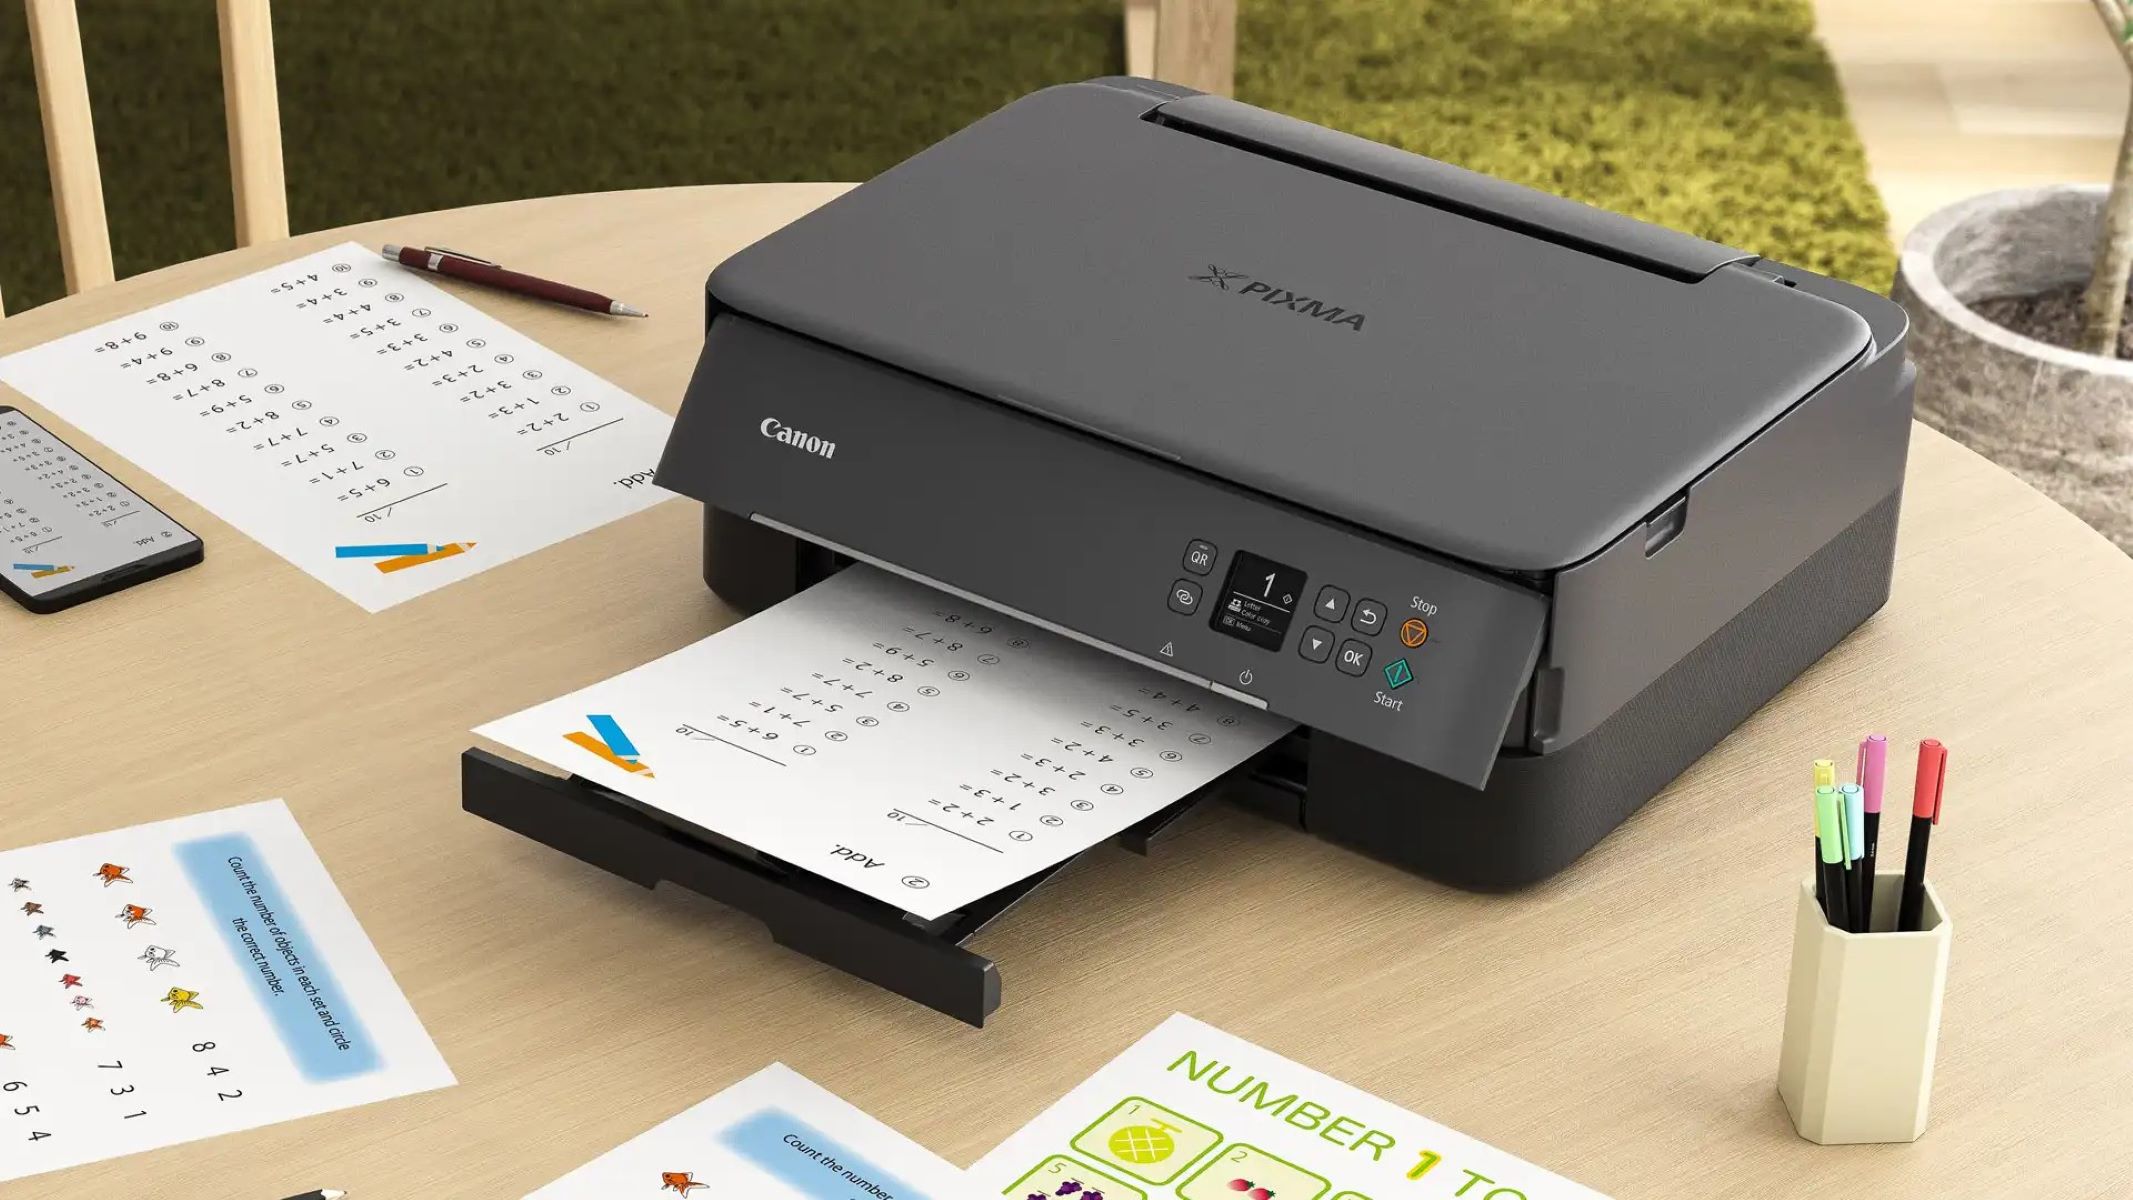 How To Reset A Canon Printer